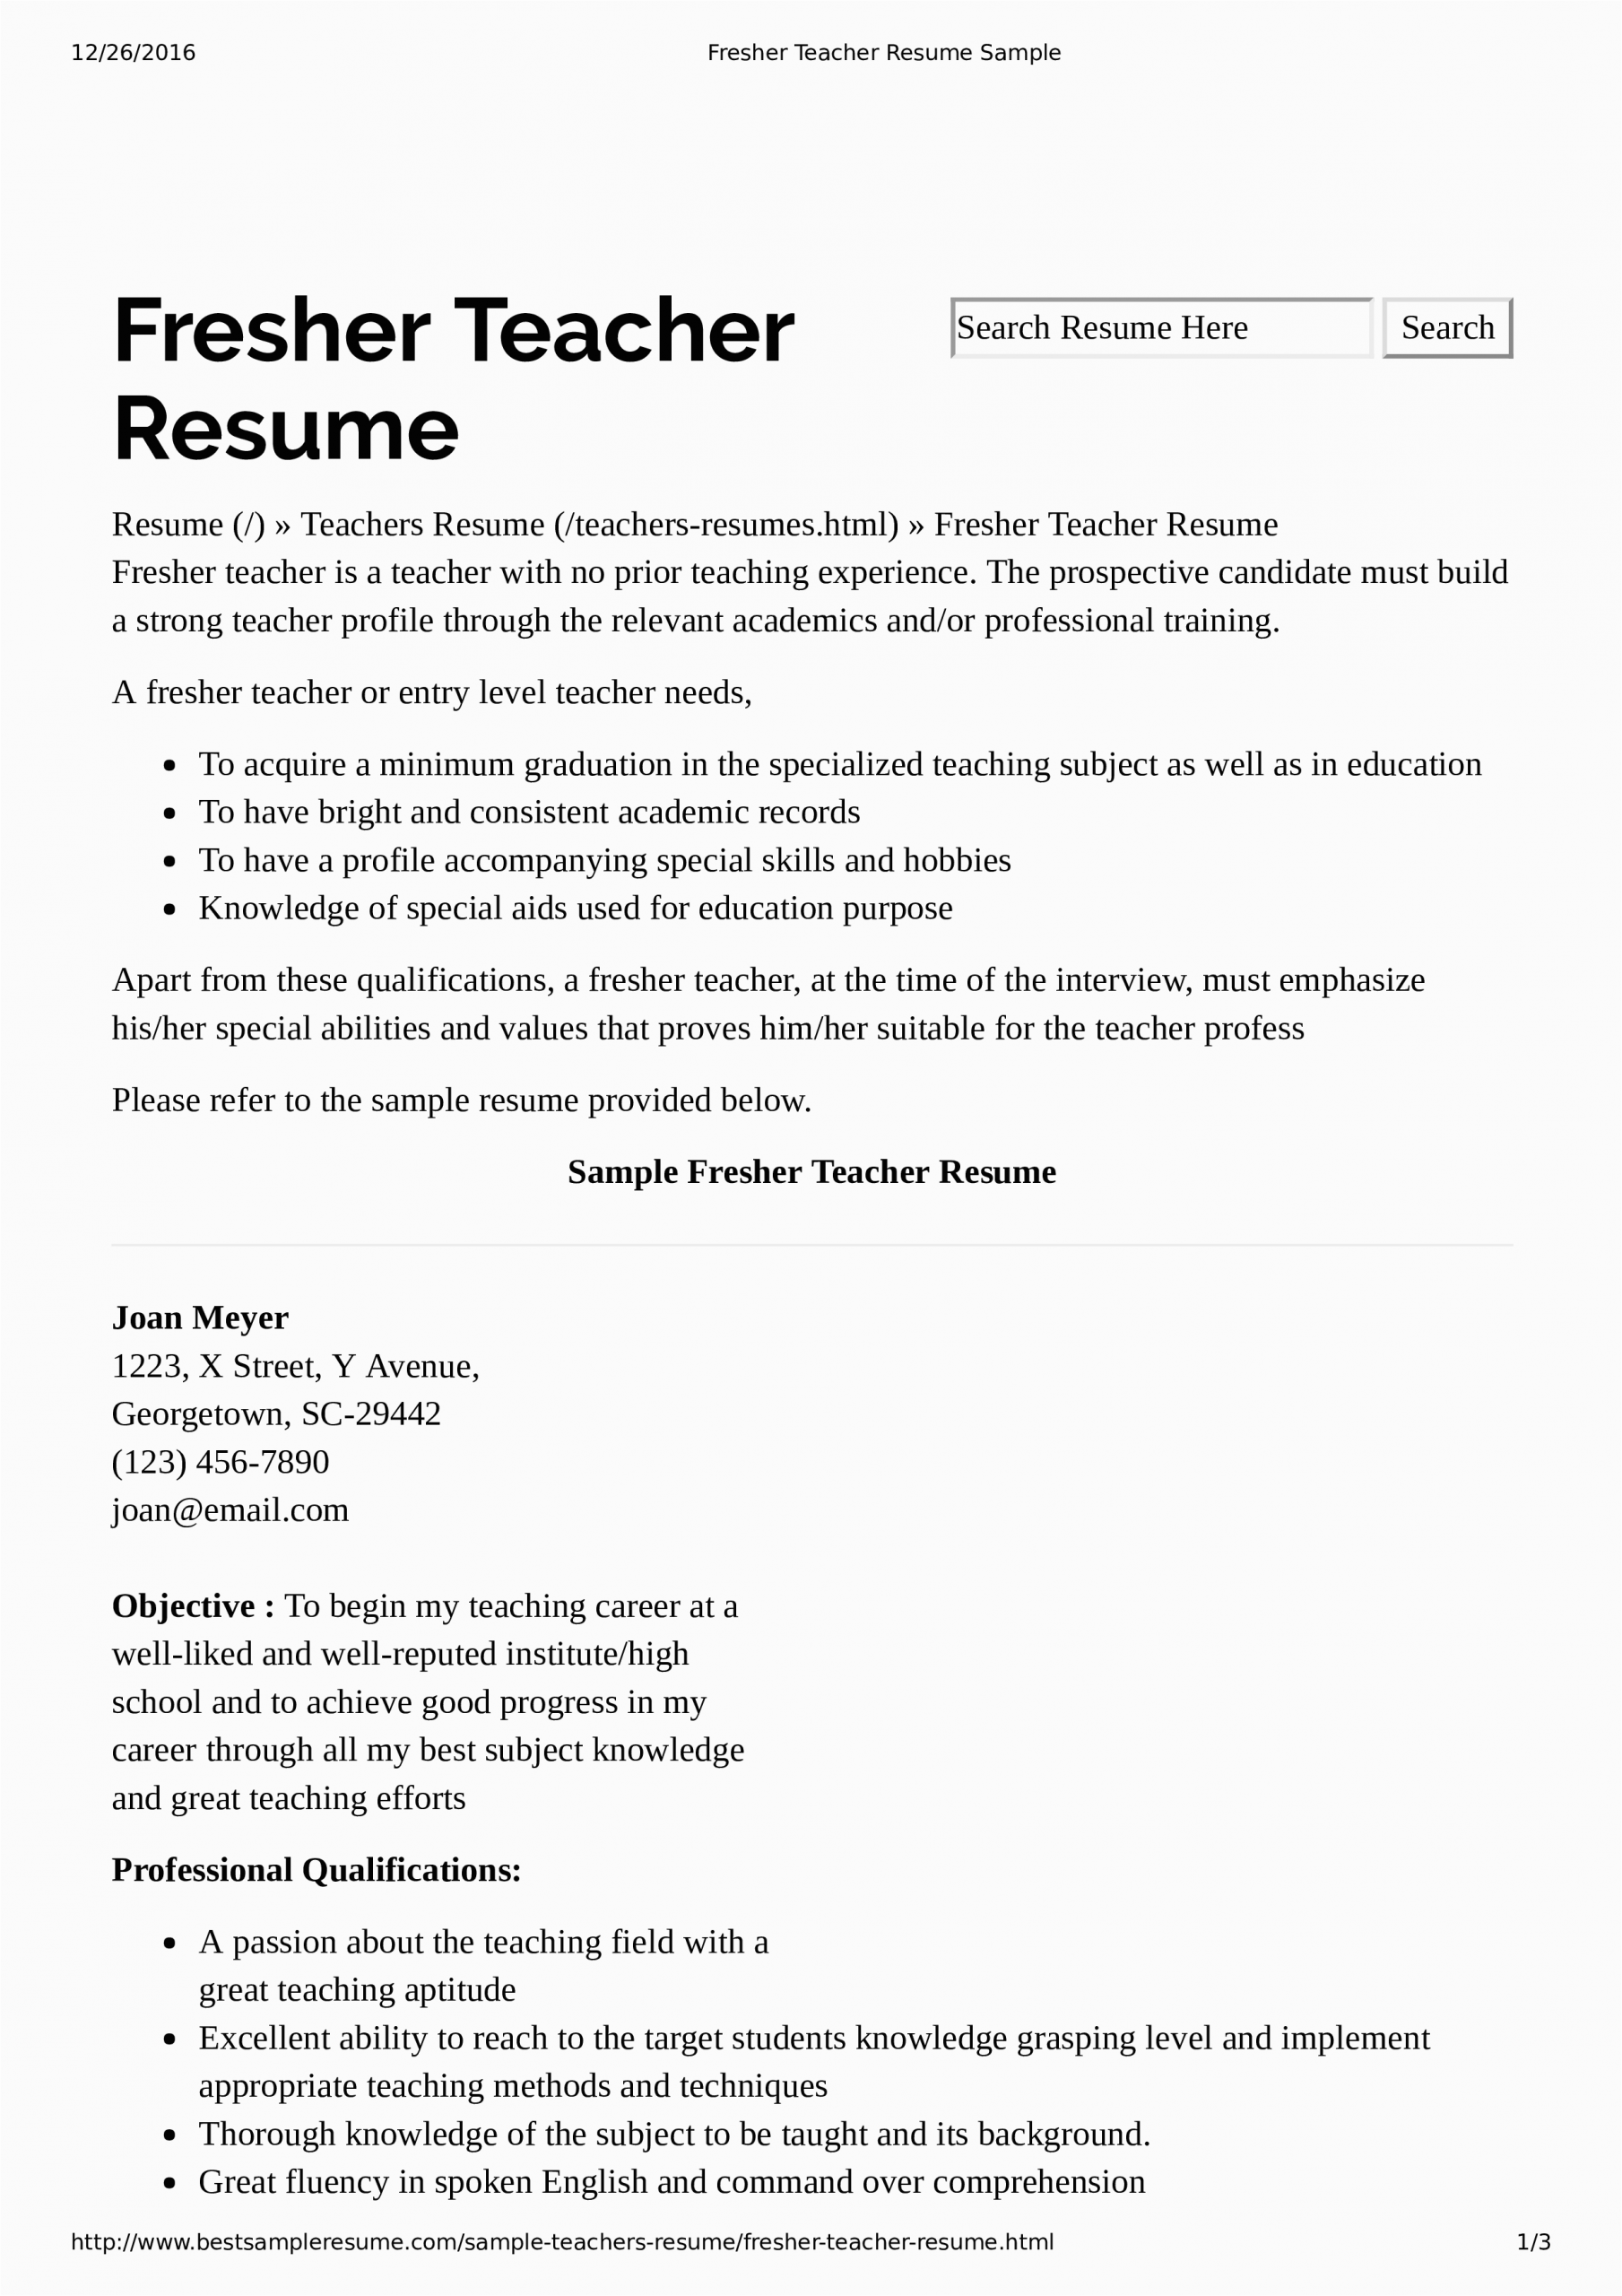 Sample Resume for Non Teaching Staff In Schools Preschool Teacher Resume with No Experience